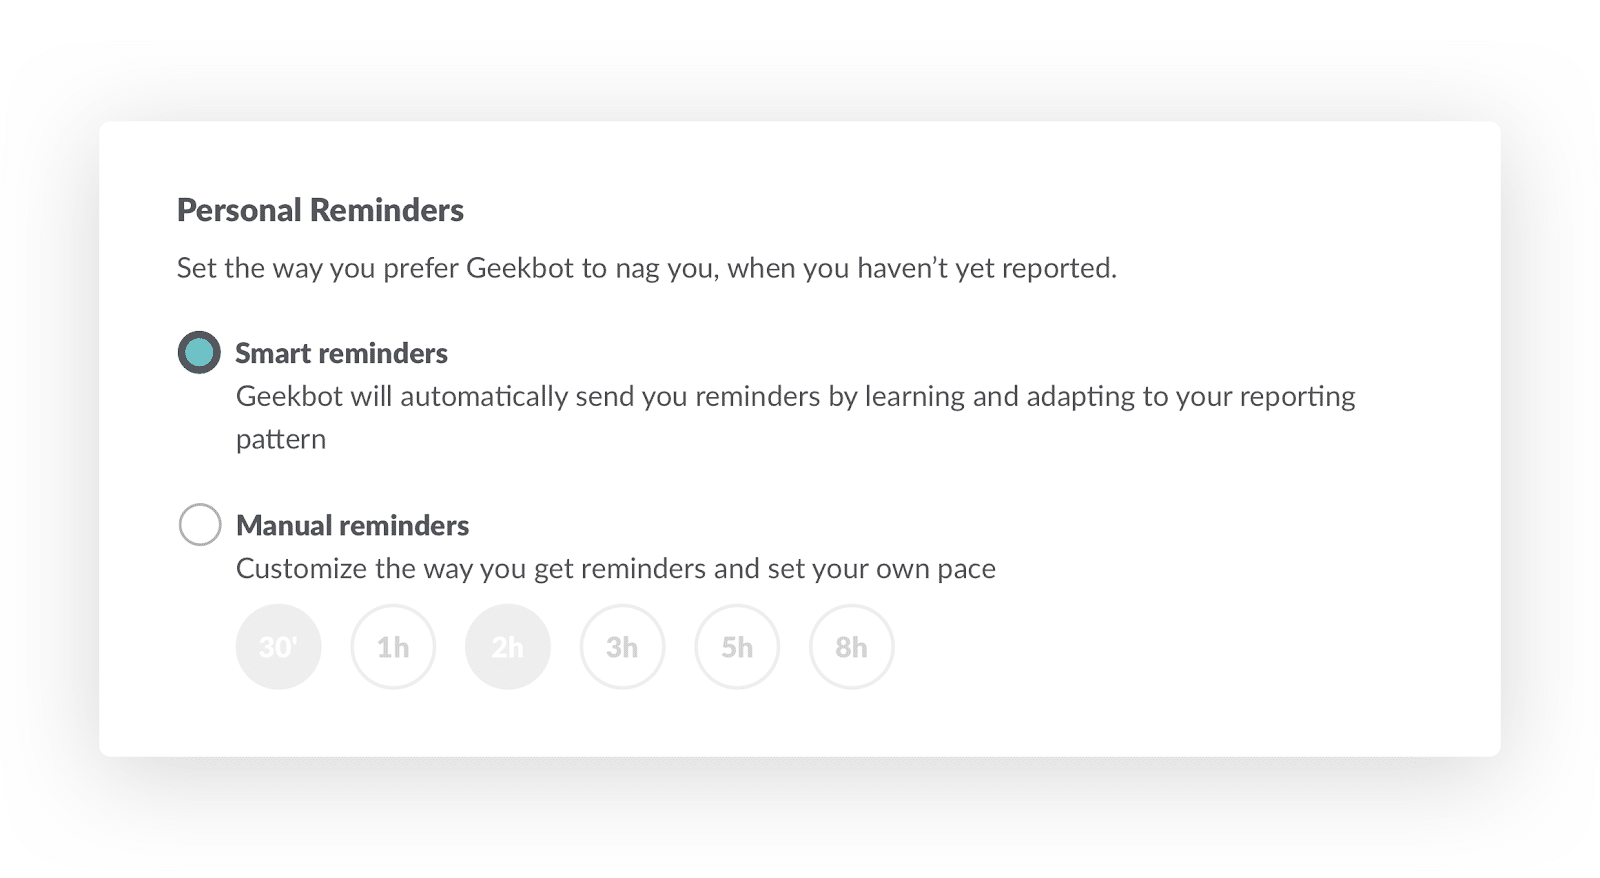 Smart reminders and Manual reminders: You can setup personal reminders in Slack to notify you if you don't answer the questions